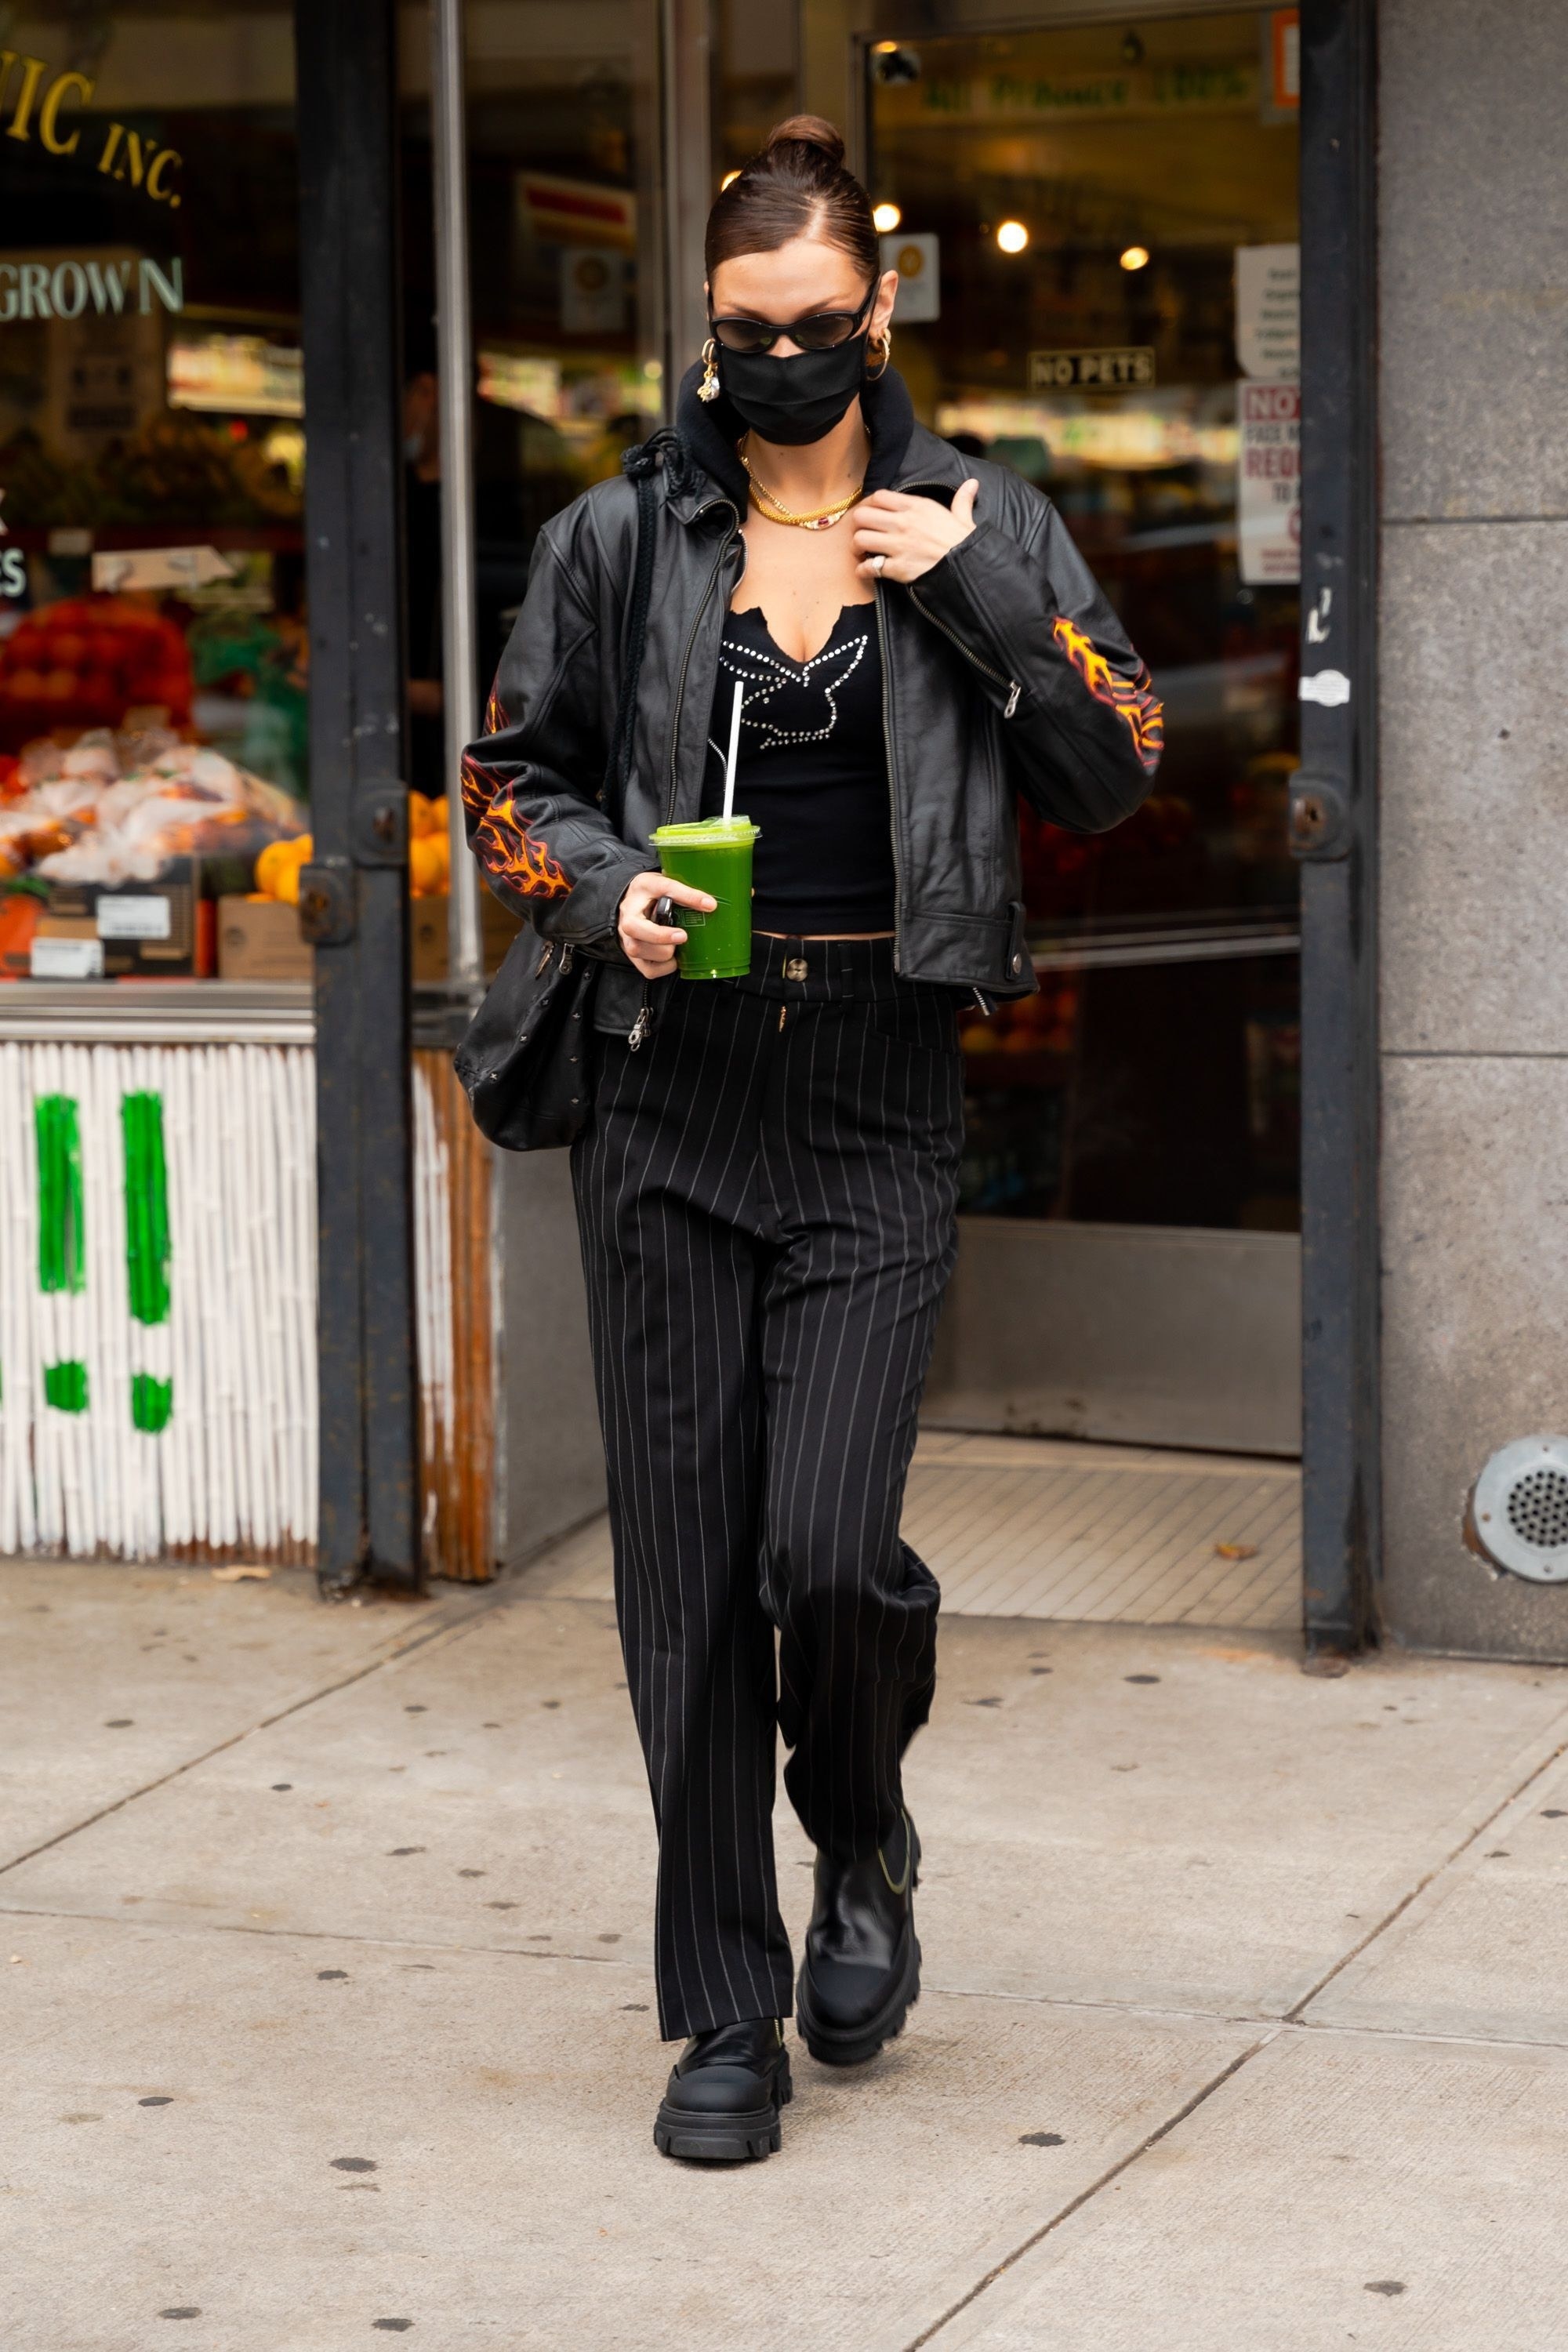 Bella Hadid in a leather jacket and striped pants holding a green juice